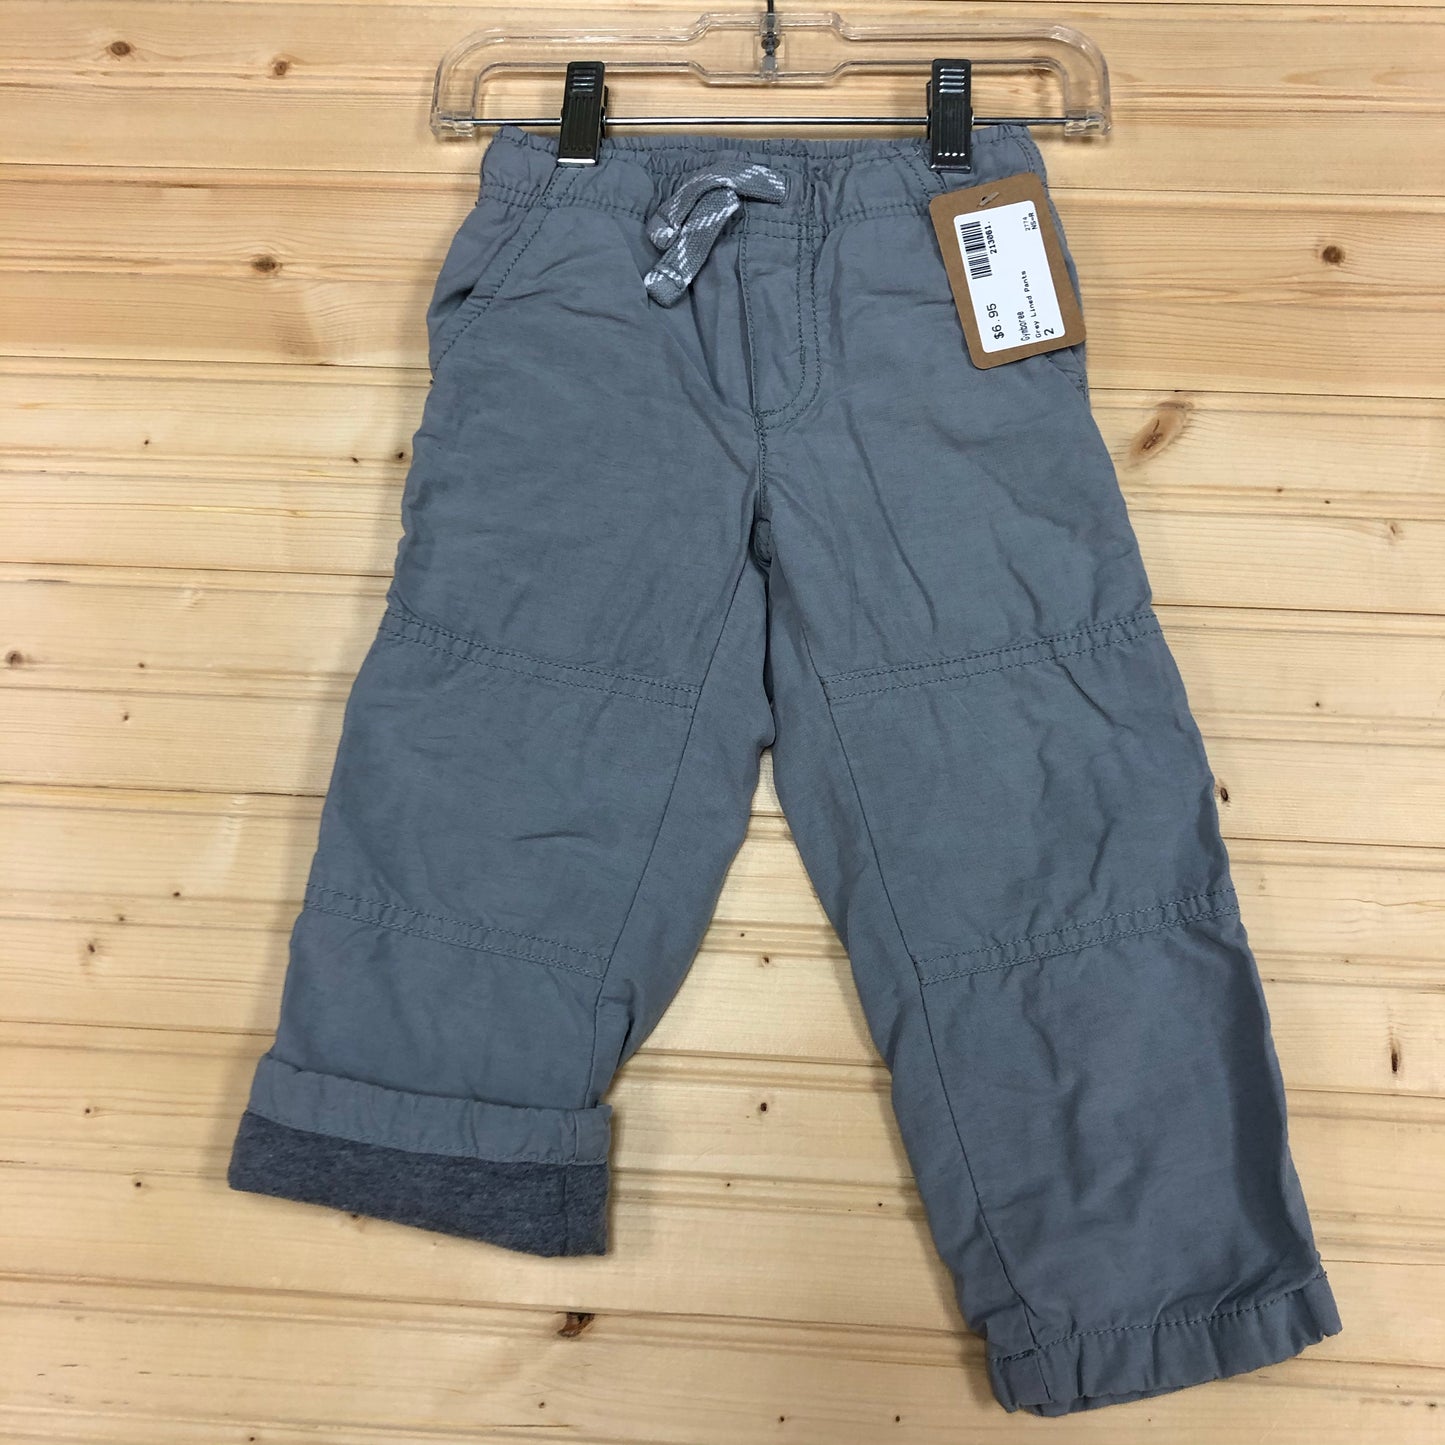 Grey Lined Pants